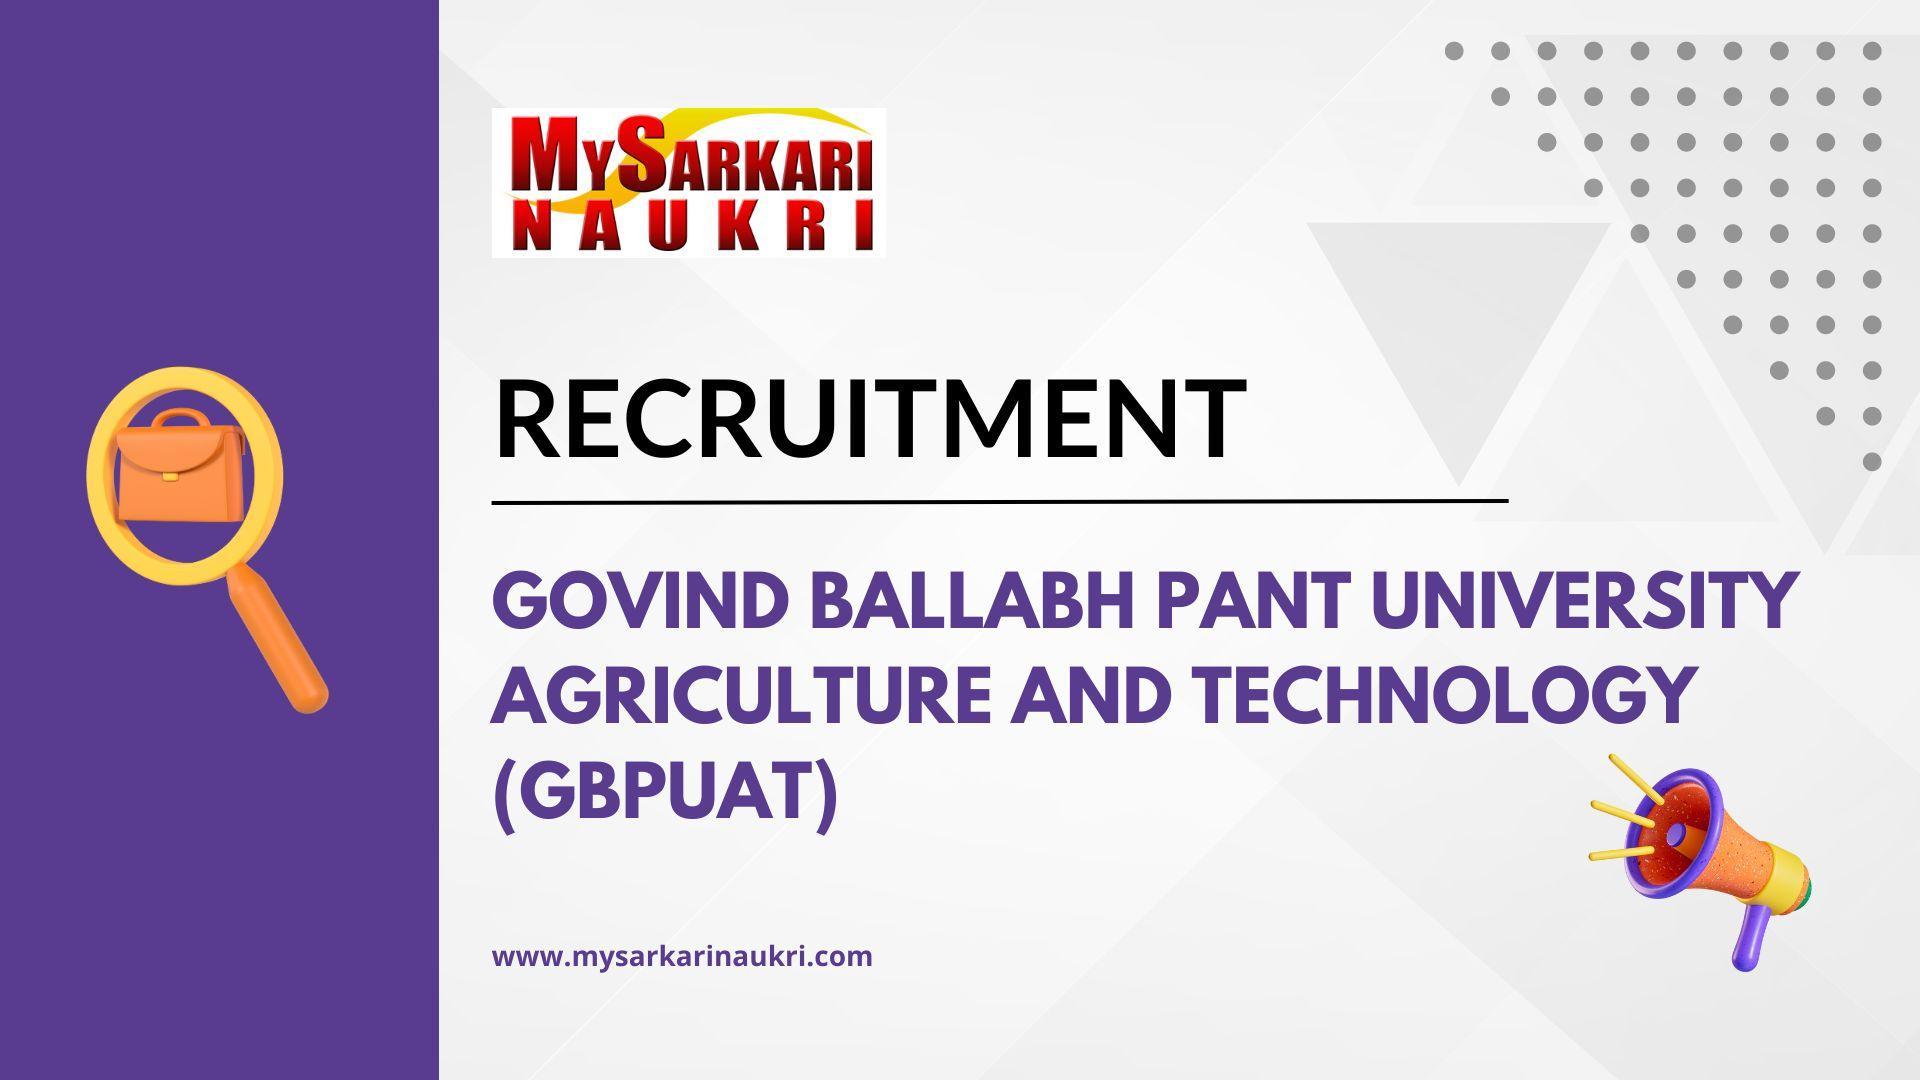 Govind Ballabh Pant University Agriculture And Technology (GBPUAT) Recruitment